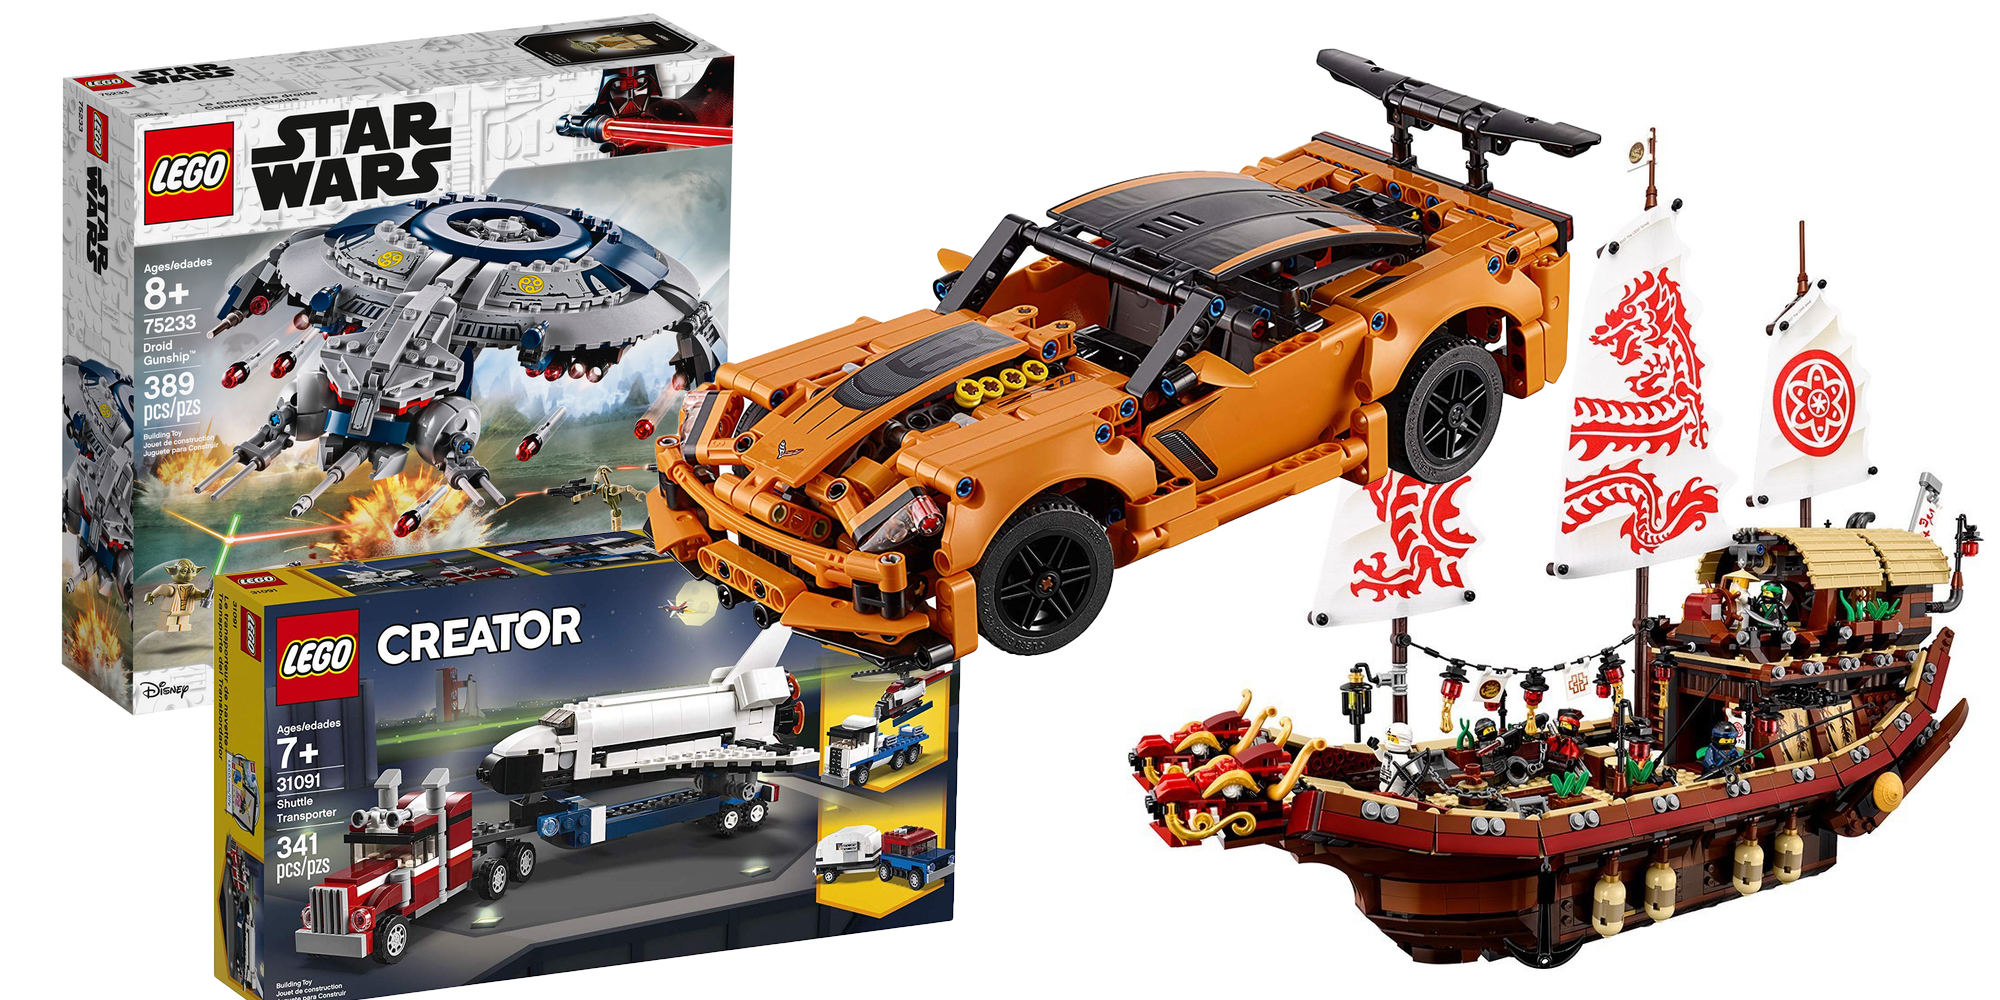 Hesitate Ancient times pin Score LEGO's Technic Corvette at a new low of $40 + more City, Star Wars  and Overwatch from $16